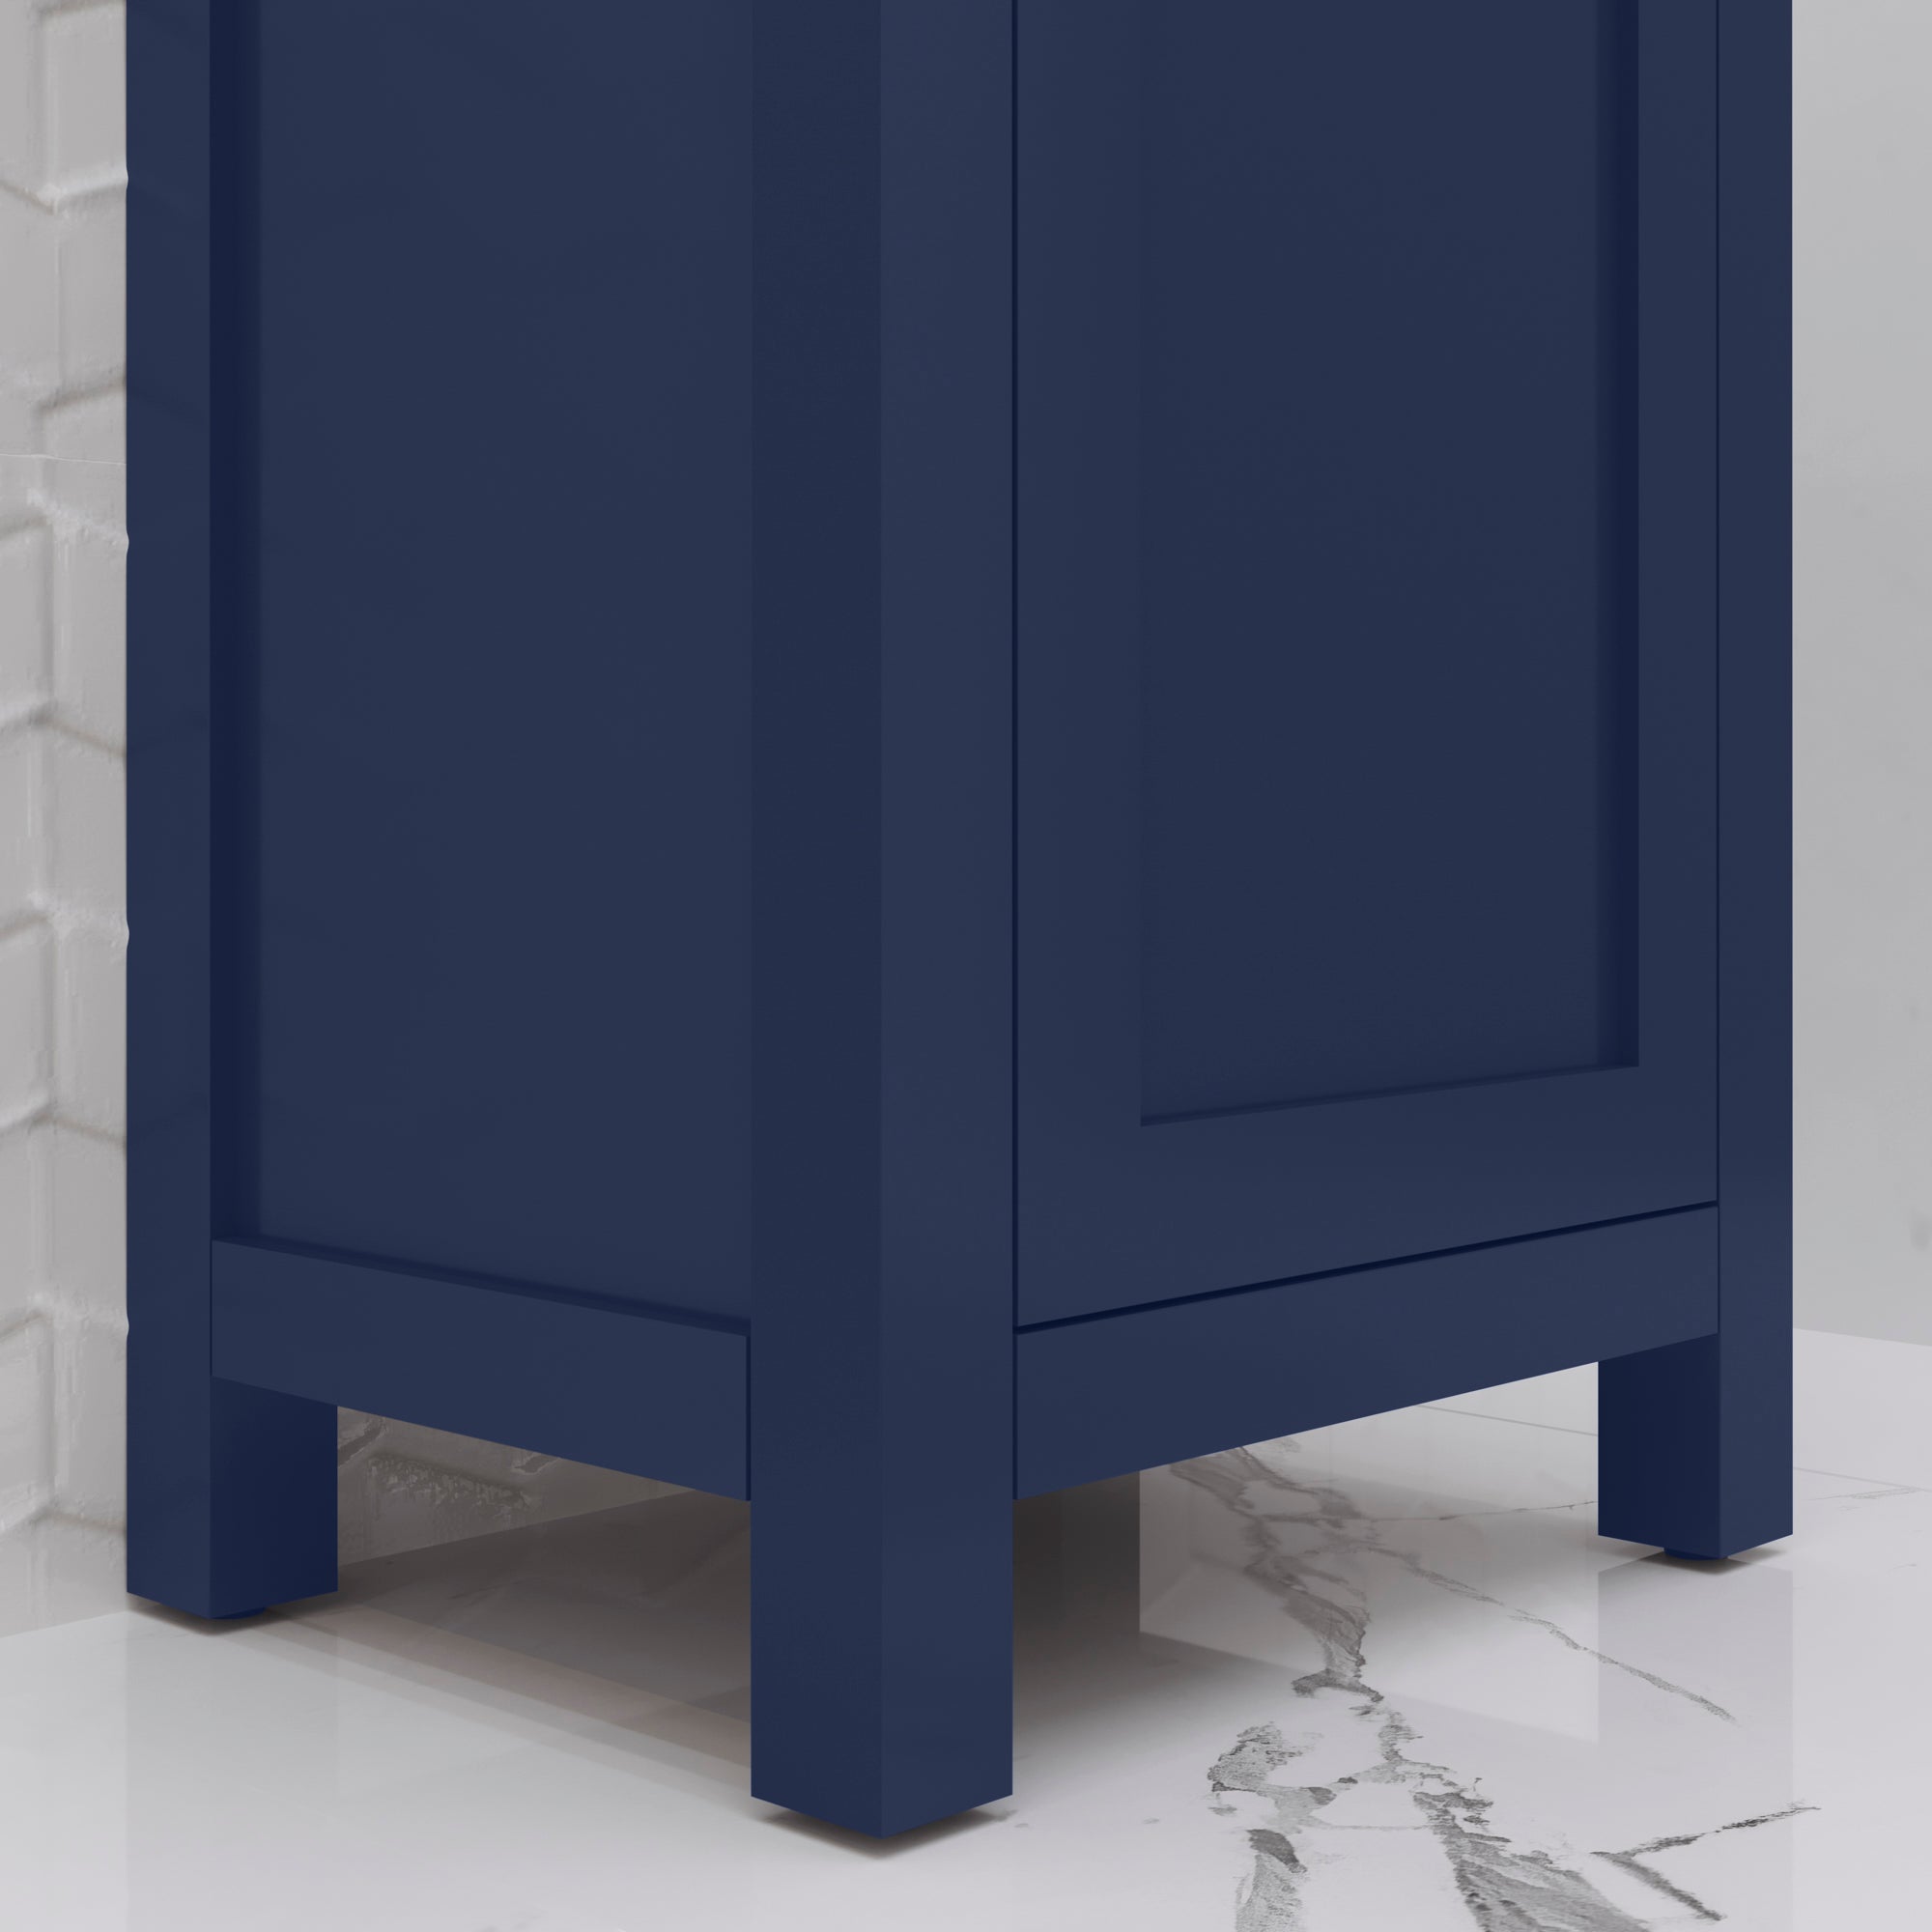 Water Creation | 18 Inch Monarch Blue MDF Single Bowl Ceramics Top Vanity With Single Door From The MIA Collection | MI18CR06MB-000000000